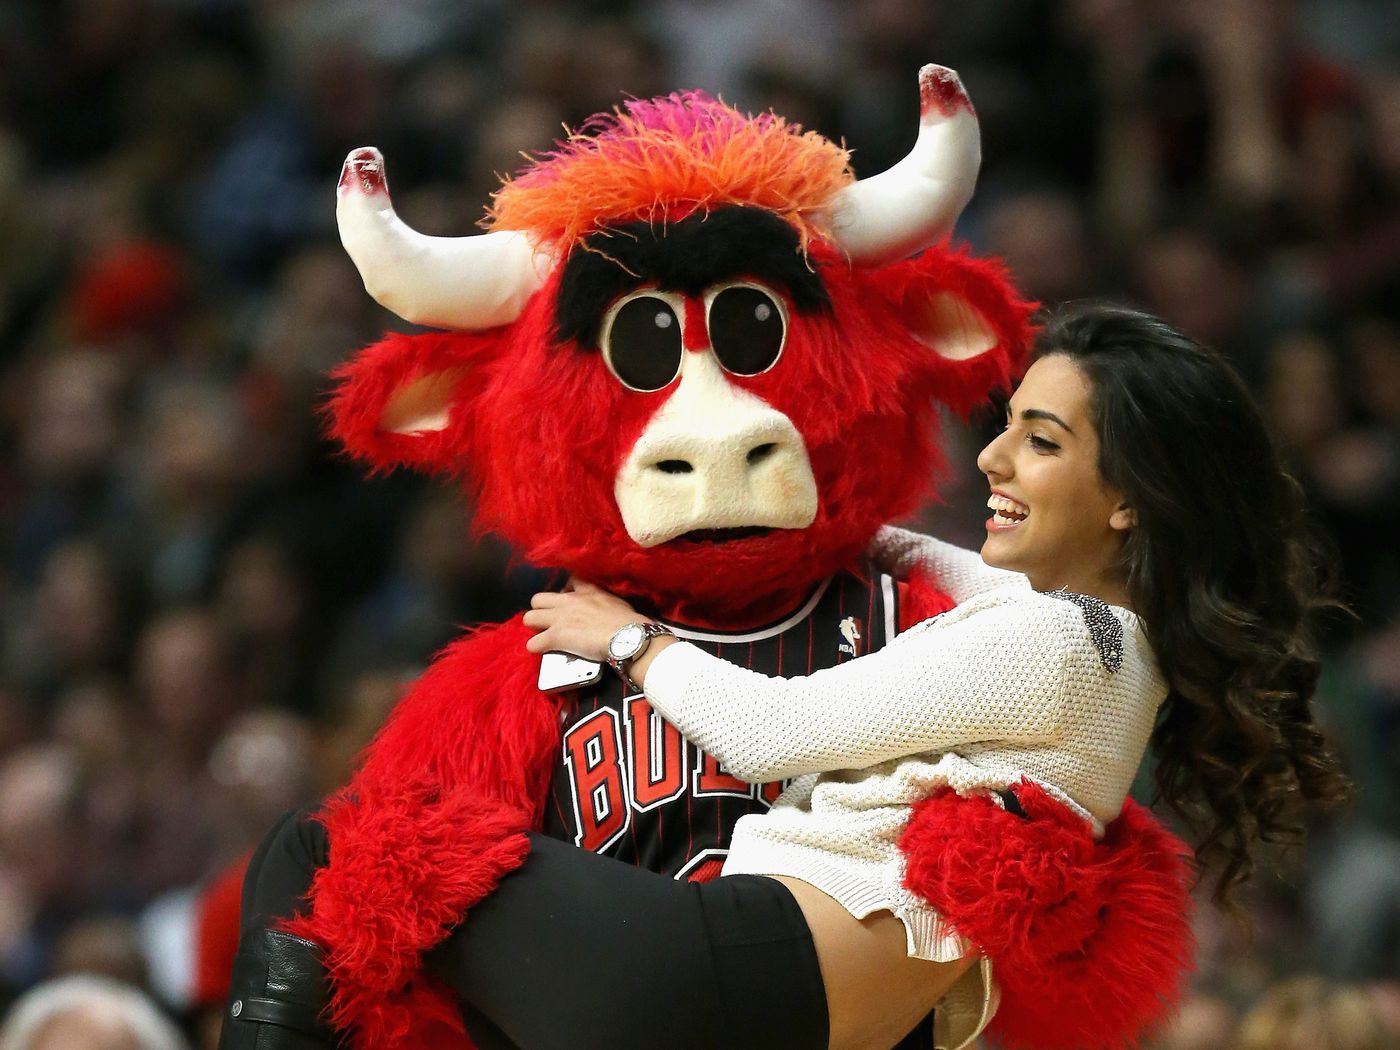 Benny the Bull convinces referee to dance with him